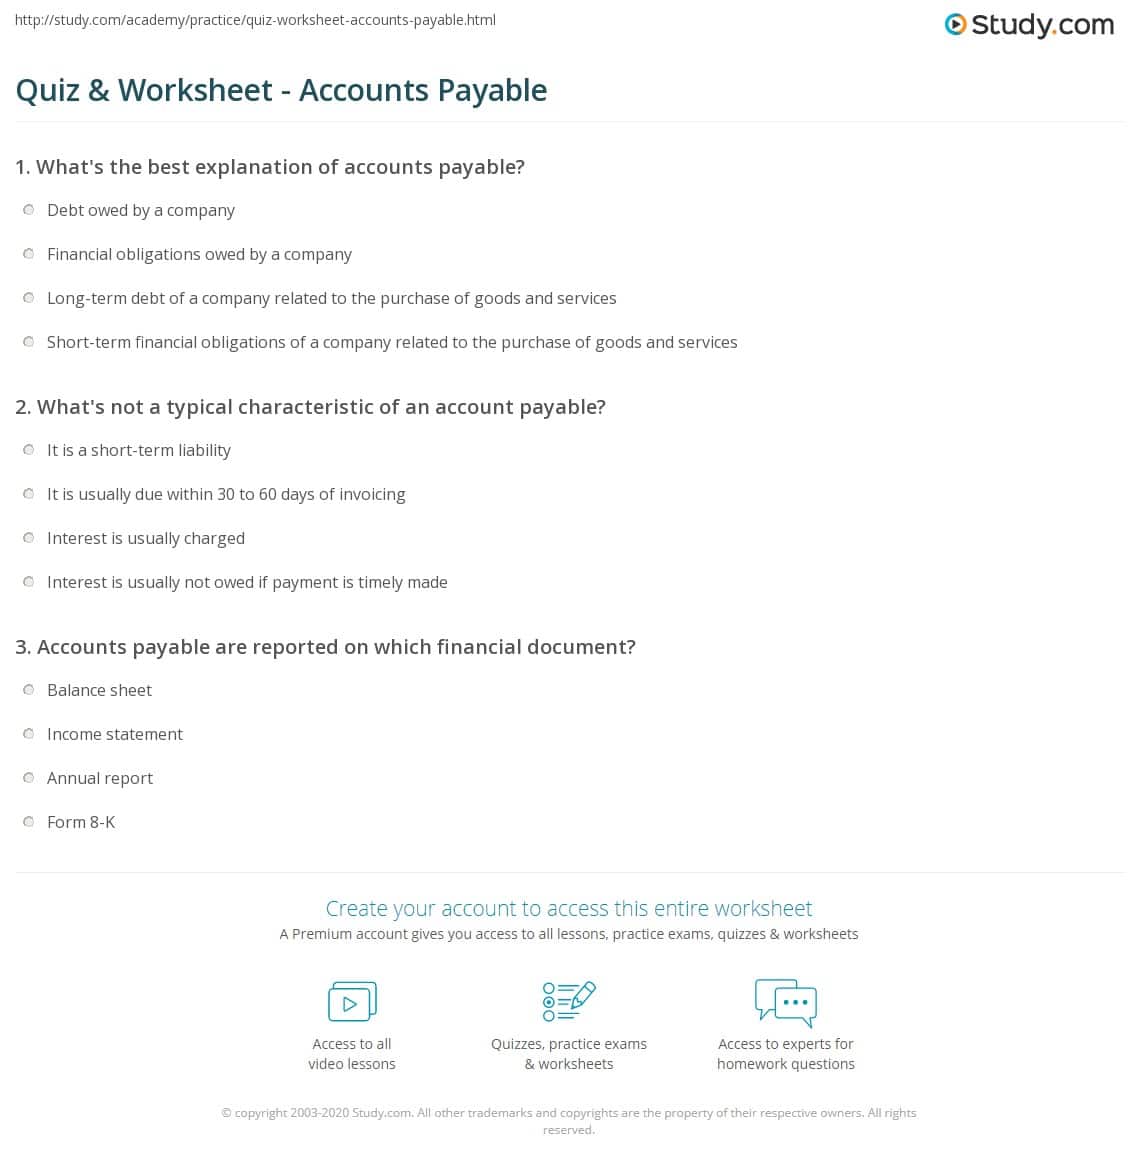 Accounts Payable Questions And Answers